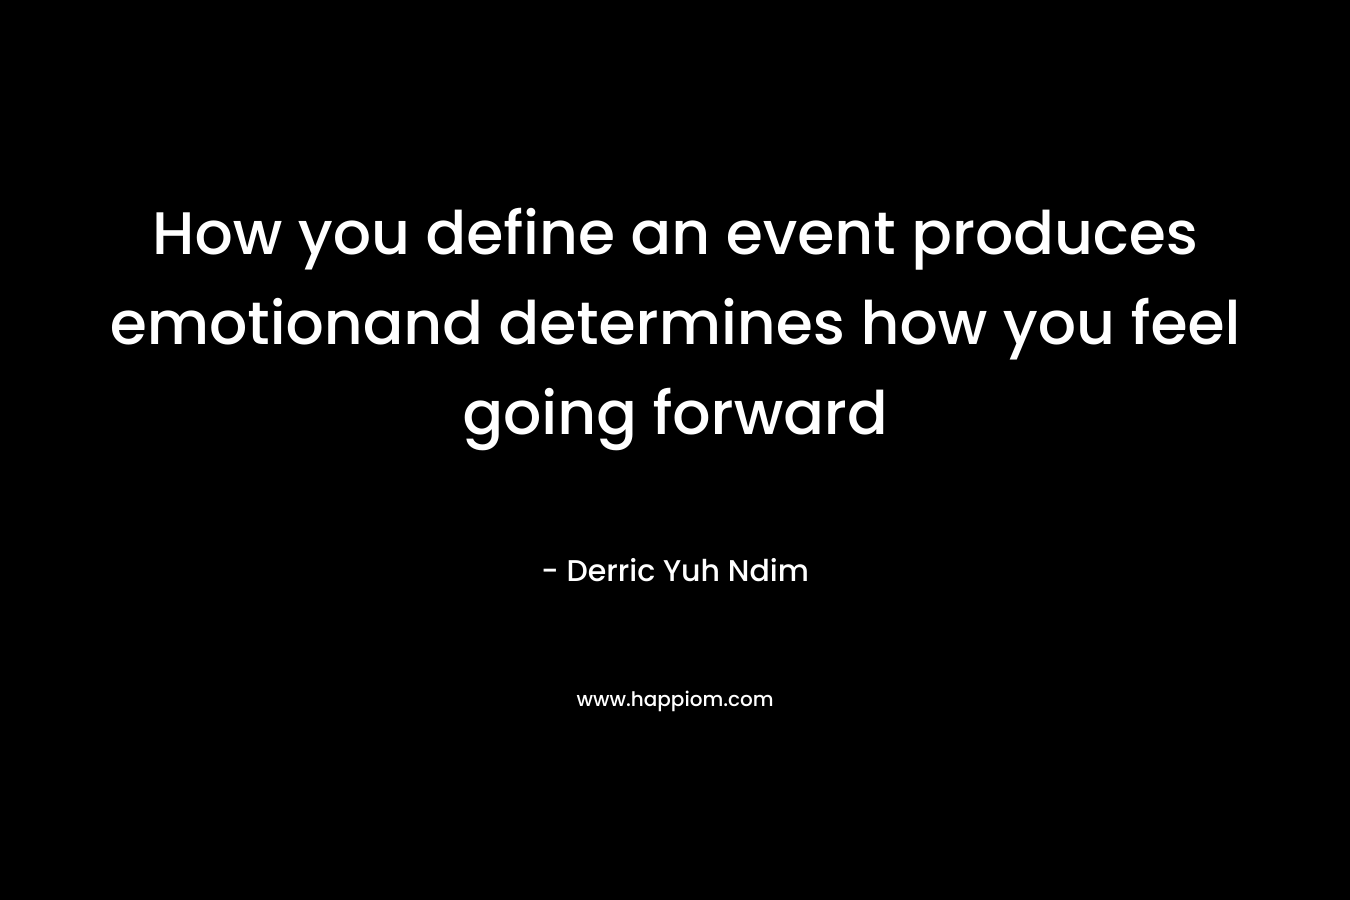 How you define an event produces emotionand determines how you feel going forward